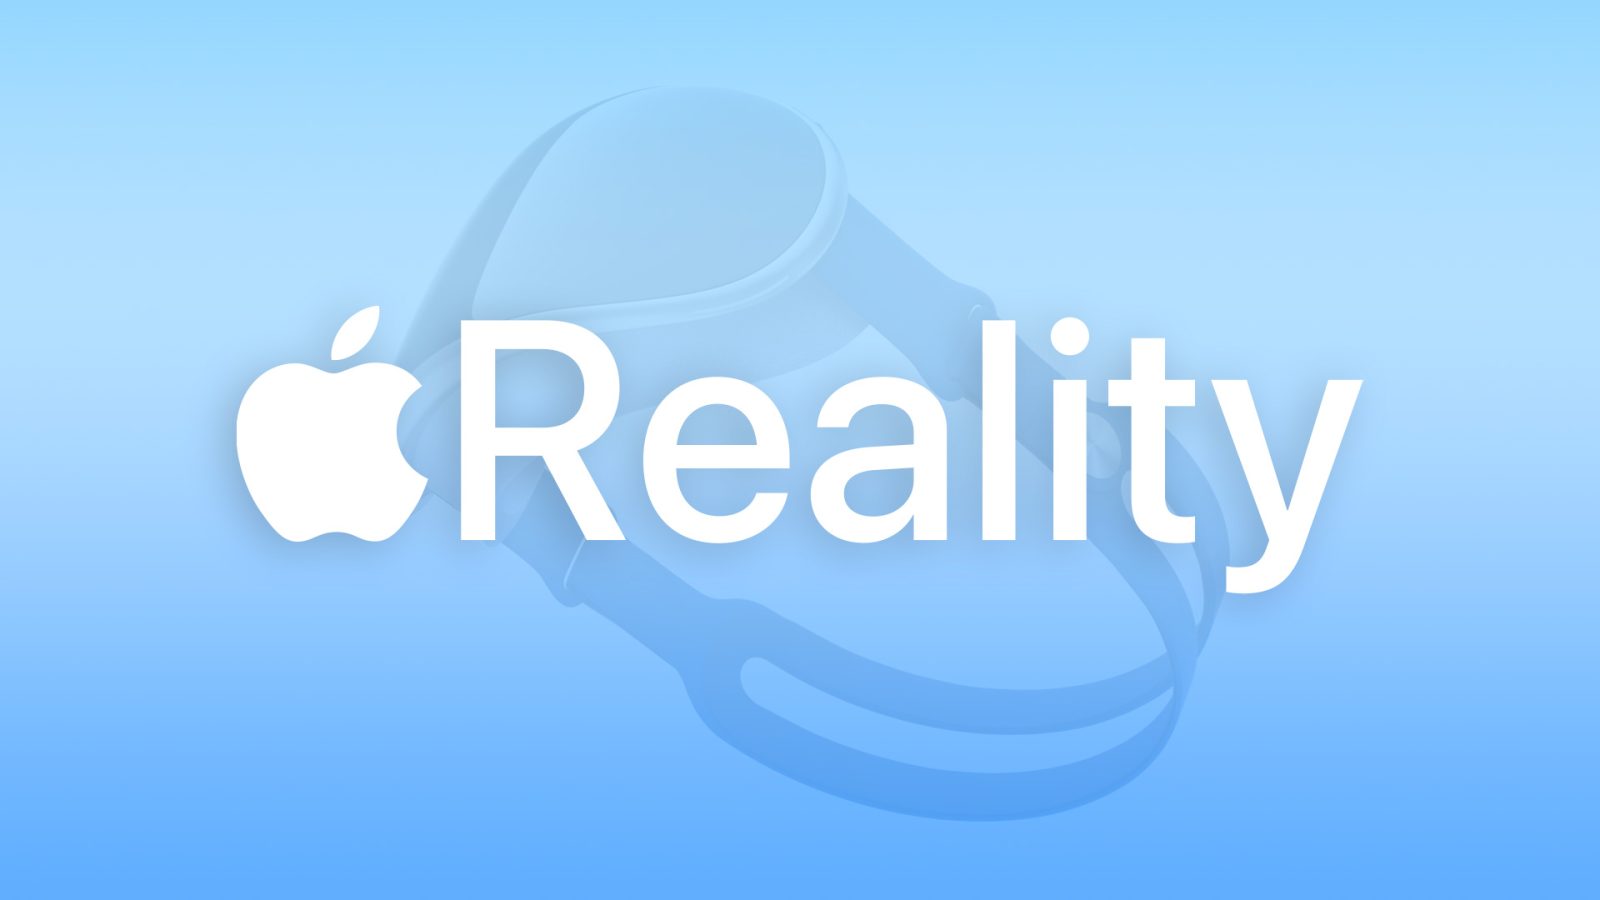 Apple could plan two different operating systems for its headset ecosystem: xrOS and realityOS